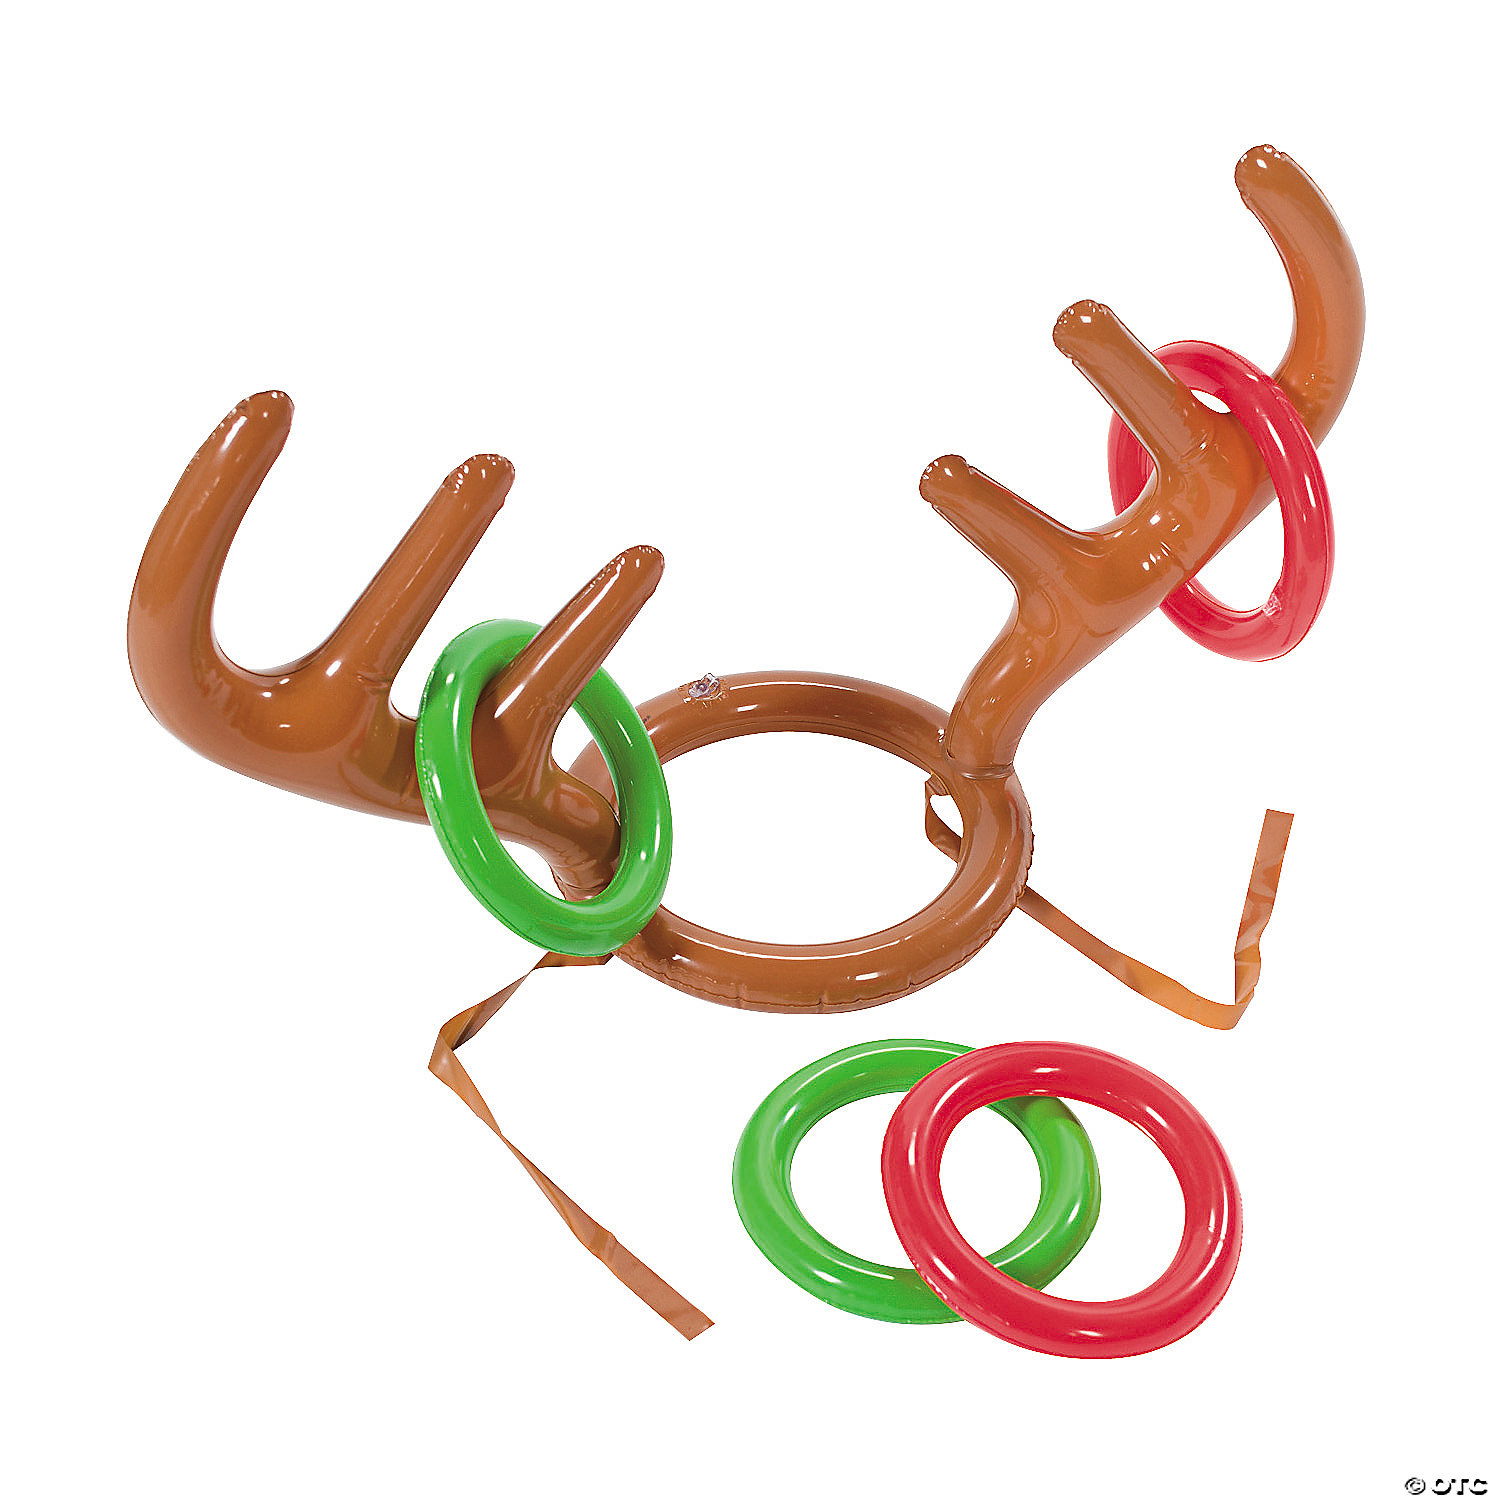 JOYIN Inflatable Reindeer Antler Toss Game for Christmas Party-One Size Fit All 